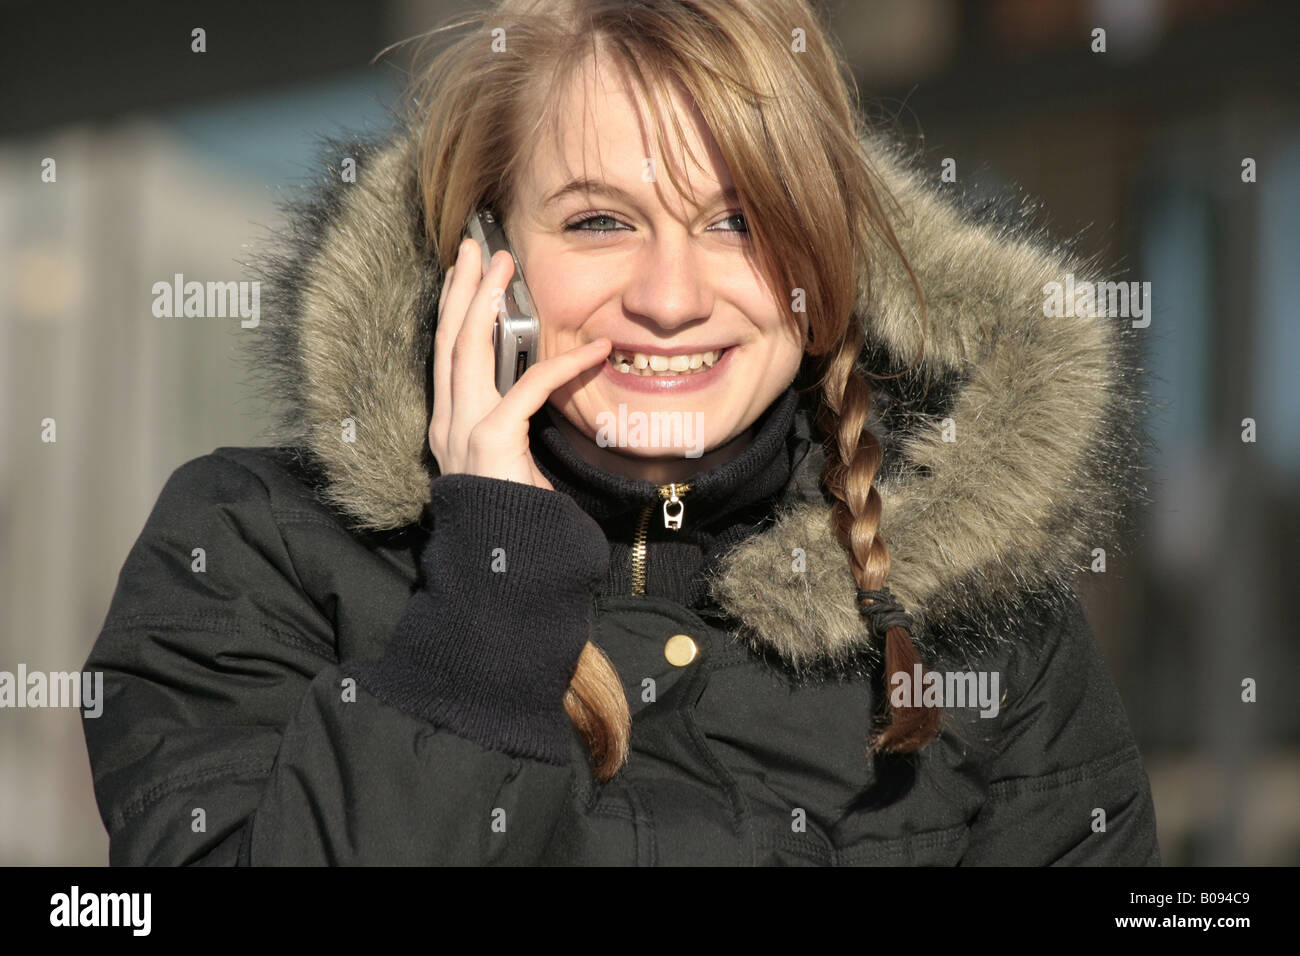 girl in winter jacket with fur collar and a cellular, Germany Stock Photo